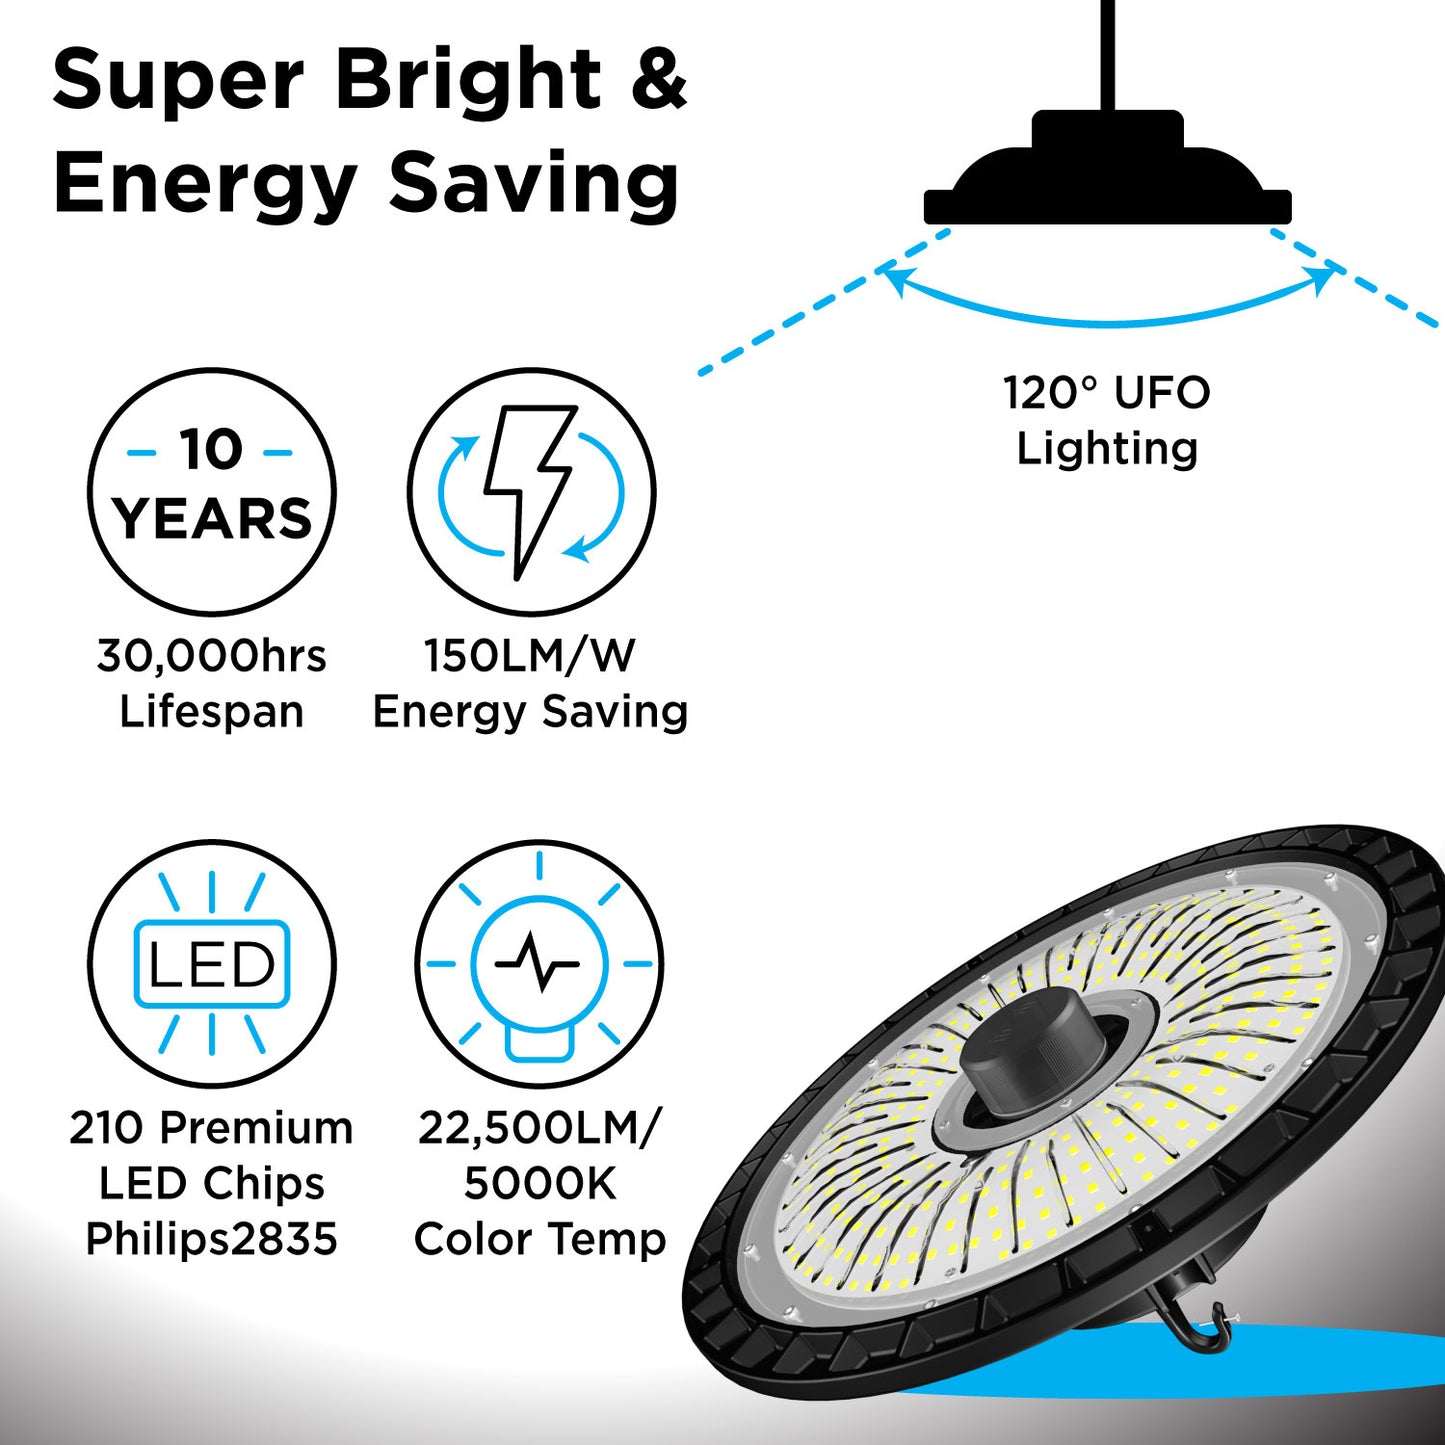 ONE Smart UFO High Bay LED Light, 6 Pack Commercial Bay Lighting with Motion Sensor for Garage/Warehouse/Gym , Remote Control, 150W 22500Lumen Energy Saving, UL Certified IP66 Waterproof